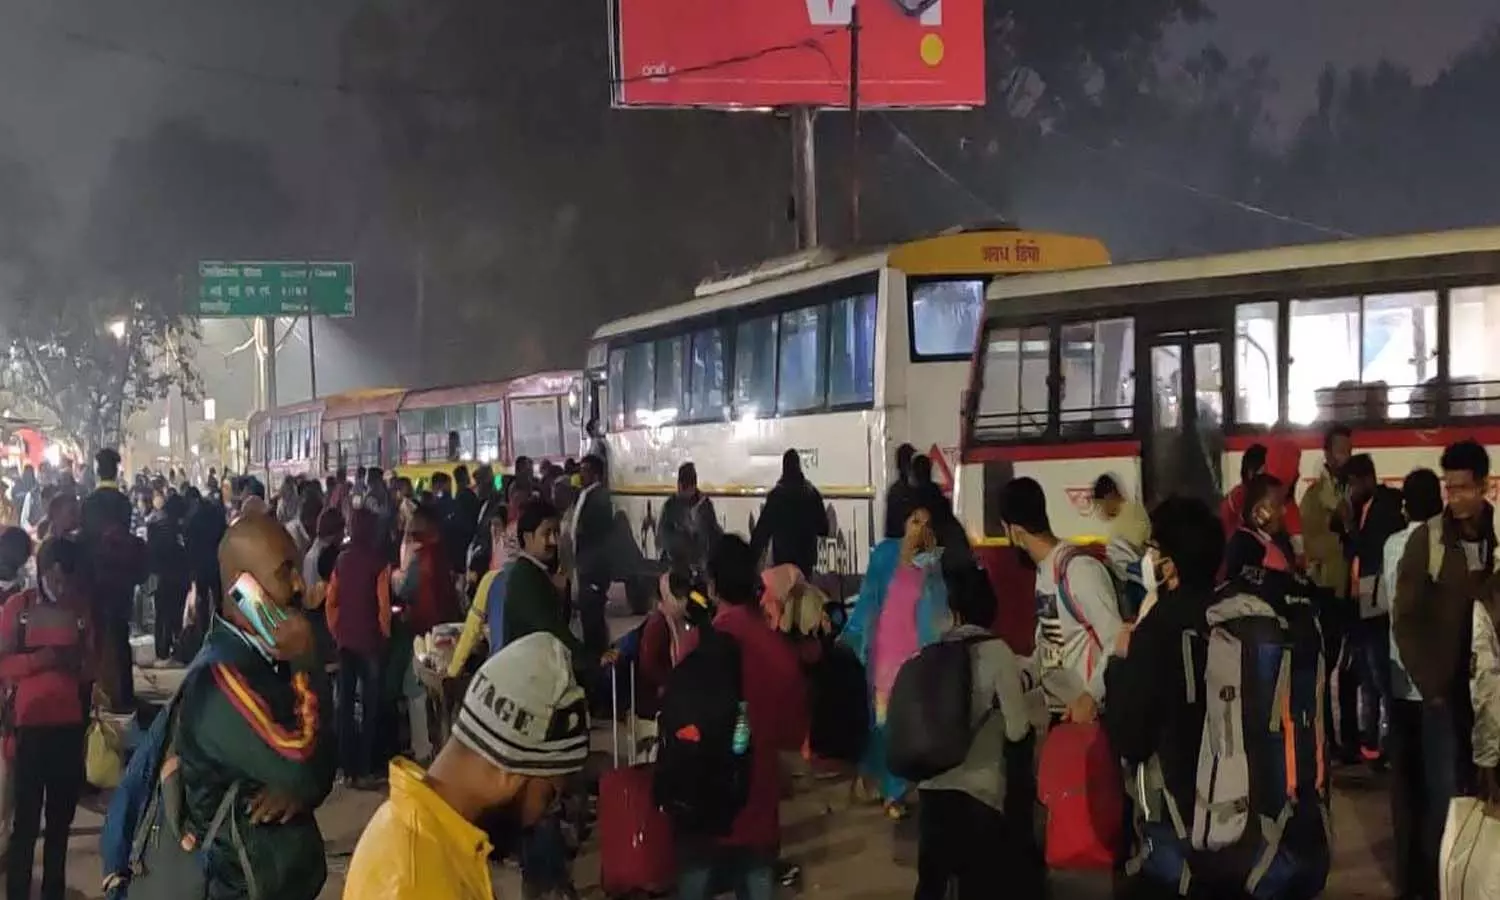 Gorakhpur News: Roadways buses went to PMs program, passengers are wandering on the road in the cold night